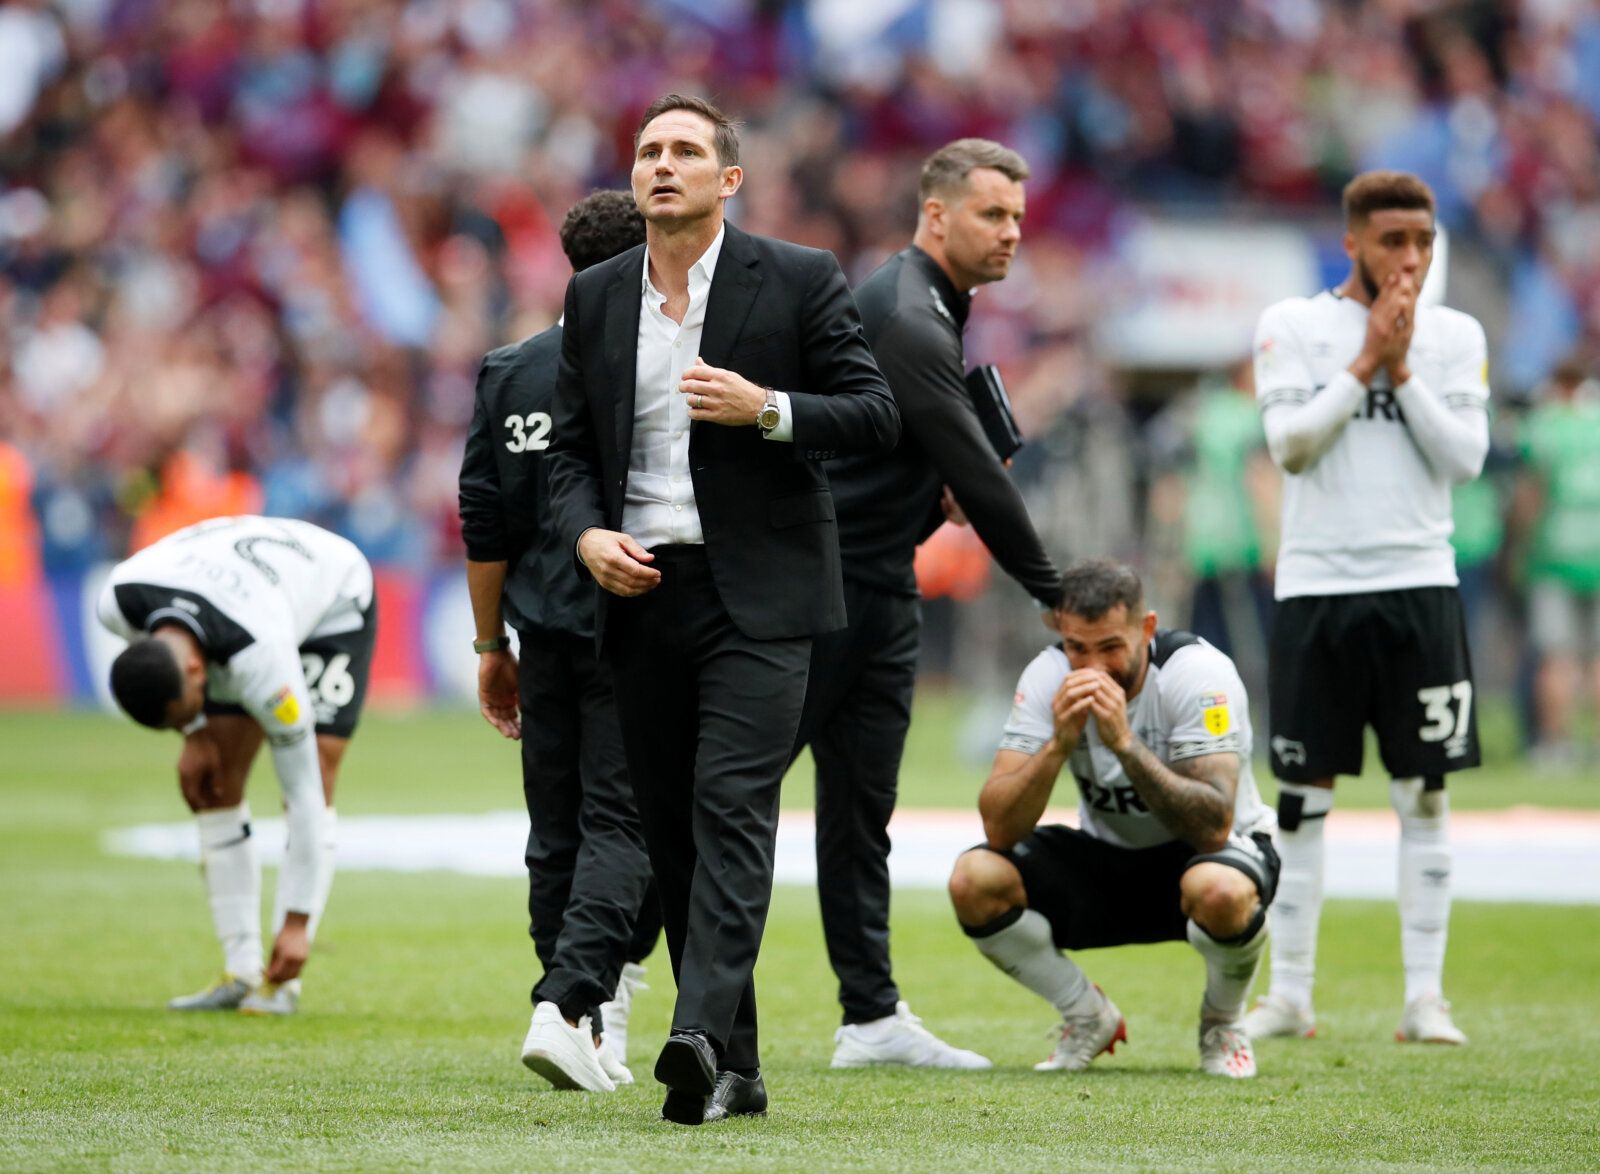 Soccer Football - Championship Playoff Final - Aston Villa v Derby County - Wembley Stadium, London, Britain - May 27, 2019  Derby County manager Frank Lampard, Jayden Bogle and teammates look dejected at the end of the match   REUTERS/David Klein